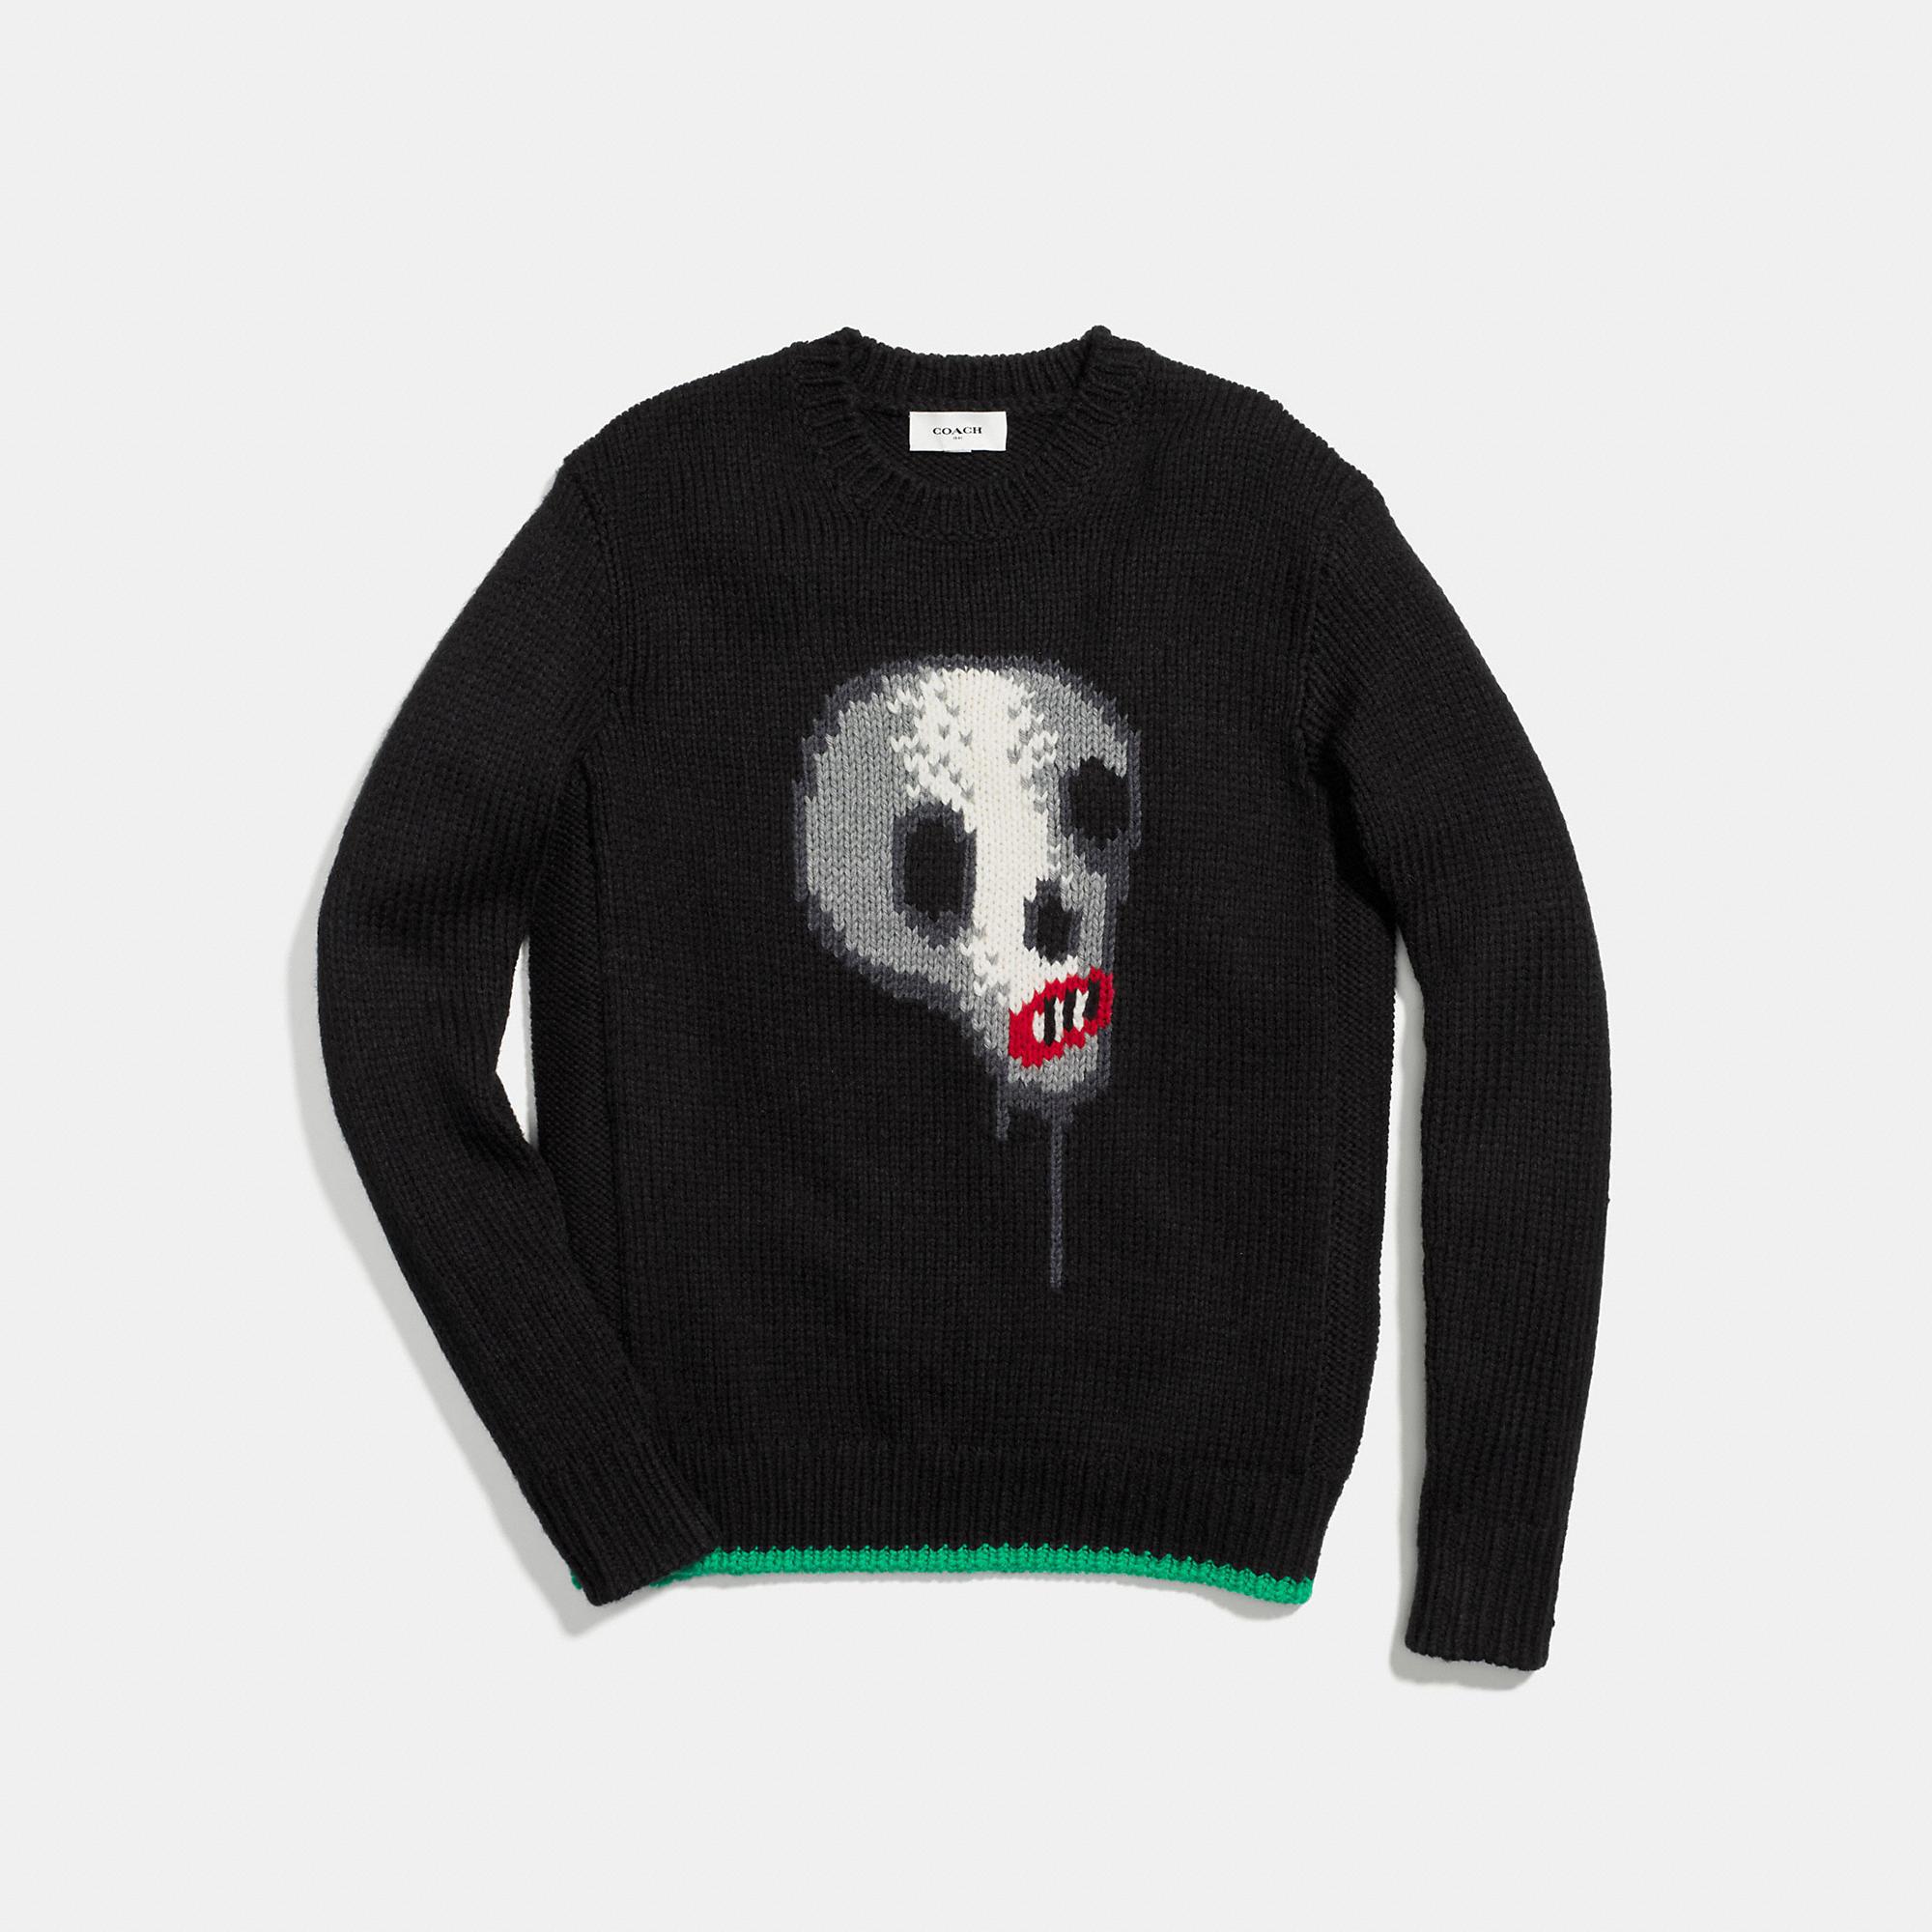 COACH Synthetic Skull Crewneck Sweater in Black for Men - Lyst